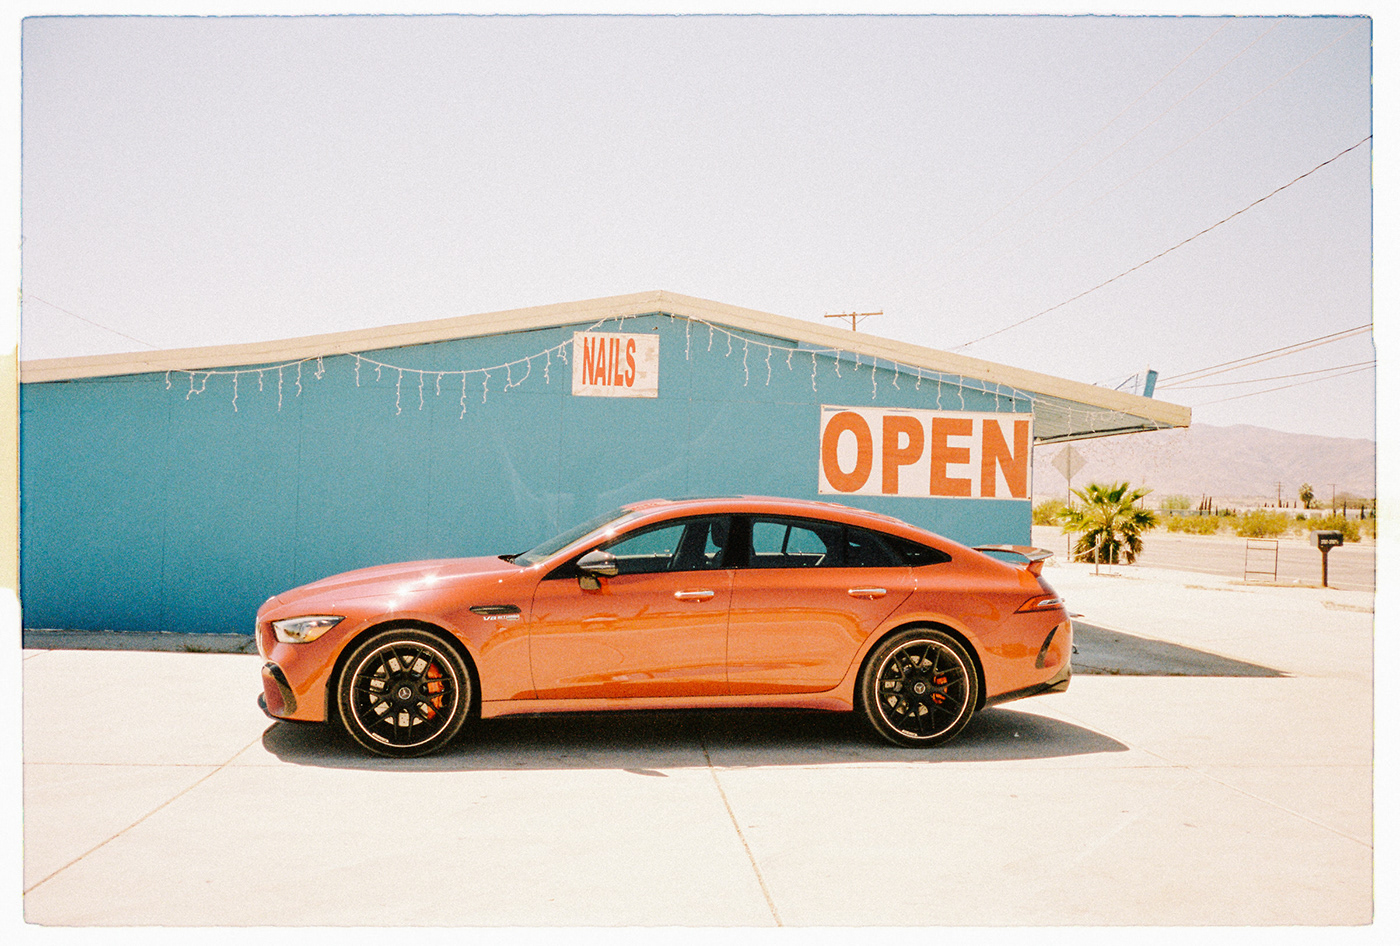 andre josselin 35mm contax t3 film photography California RoadTrip AMG Los Angeles Mercedes Benz Mercedes AMG